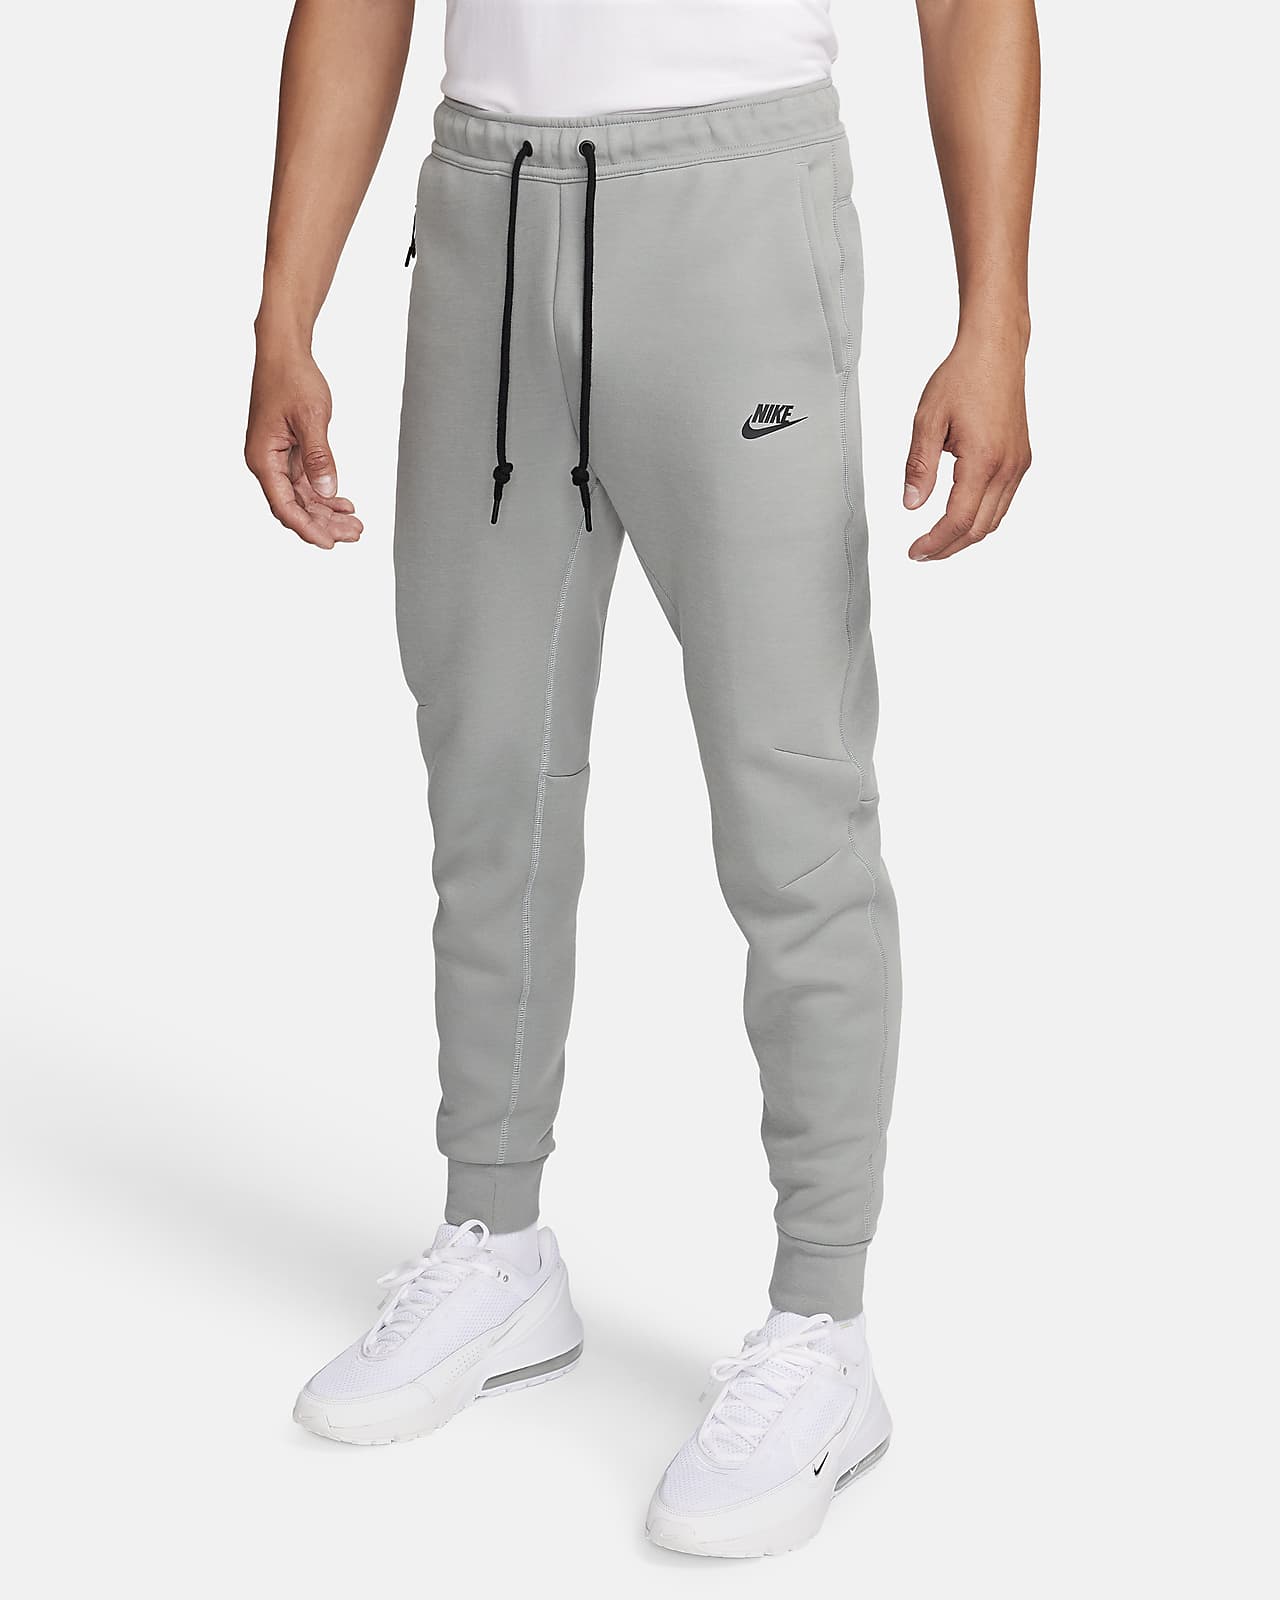 Nike NBA Compression tights  Nike tech sweatsuit, Running sleeves